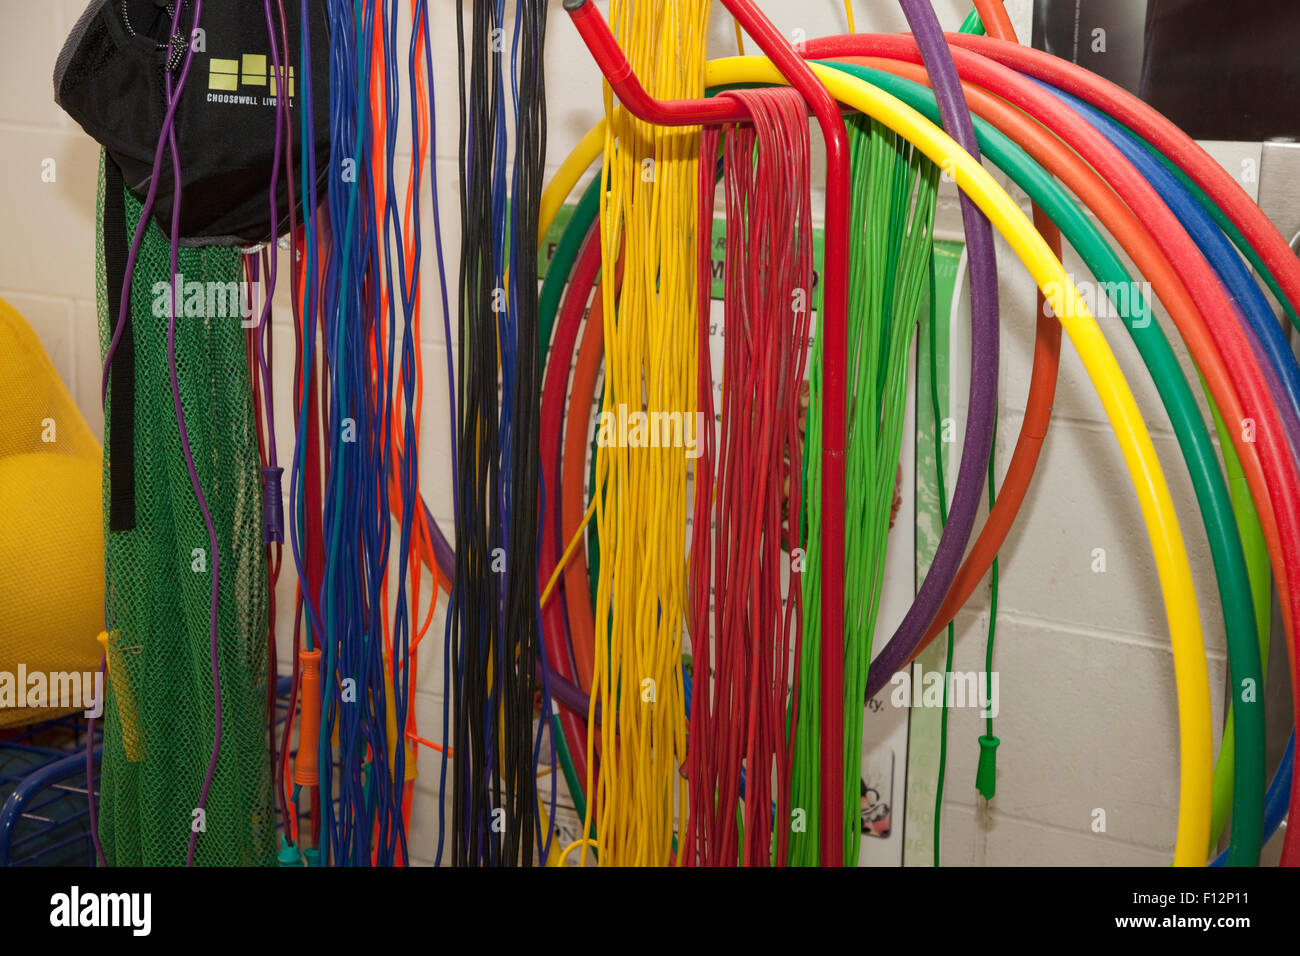 Colorful Hula Hoops and jump ropes hanging on hooks in school gymnasium. St Paul Minnesota MN USA Stock Photo